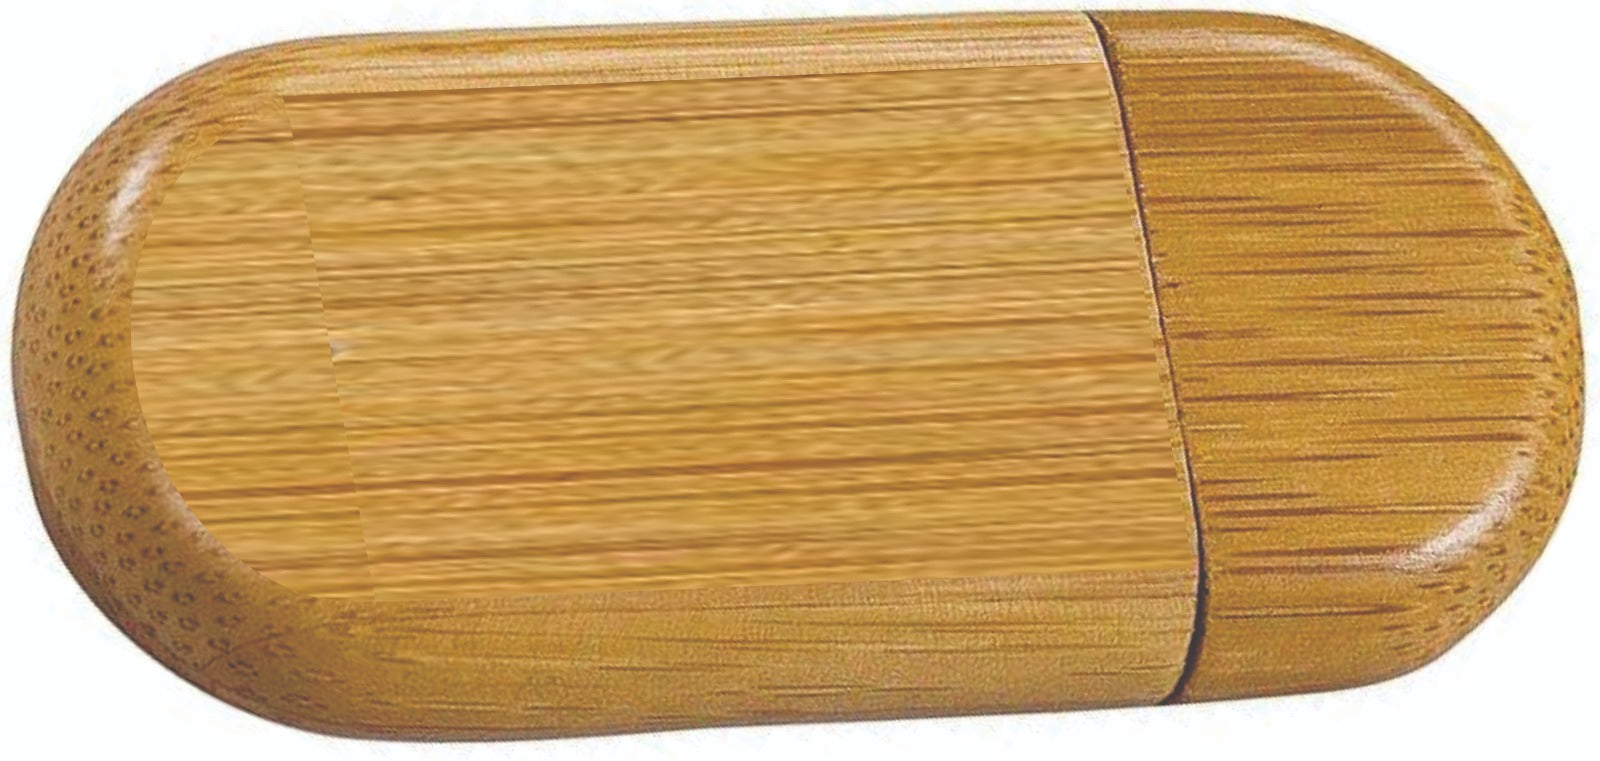 1 1/8" x 2 3/8" 8GB Bamboo USB Flash Drive with Rounded Corners